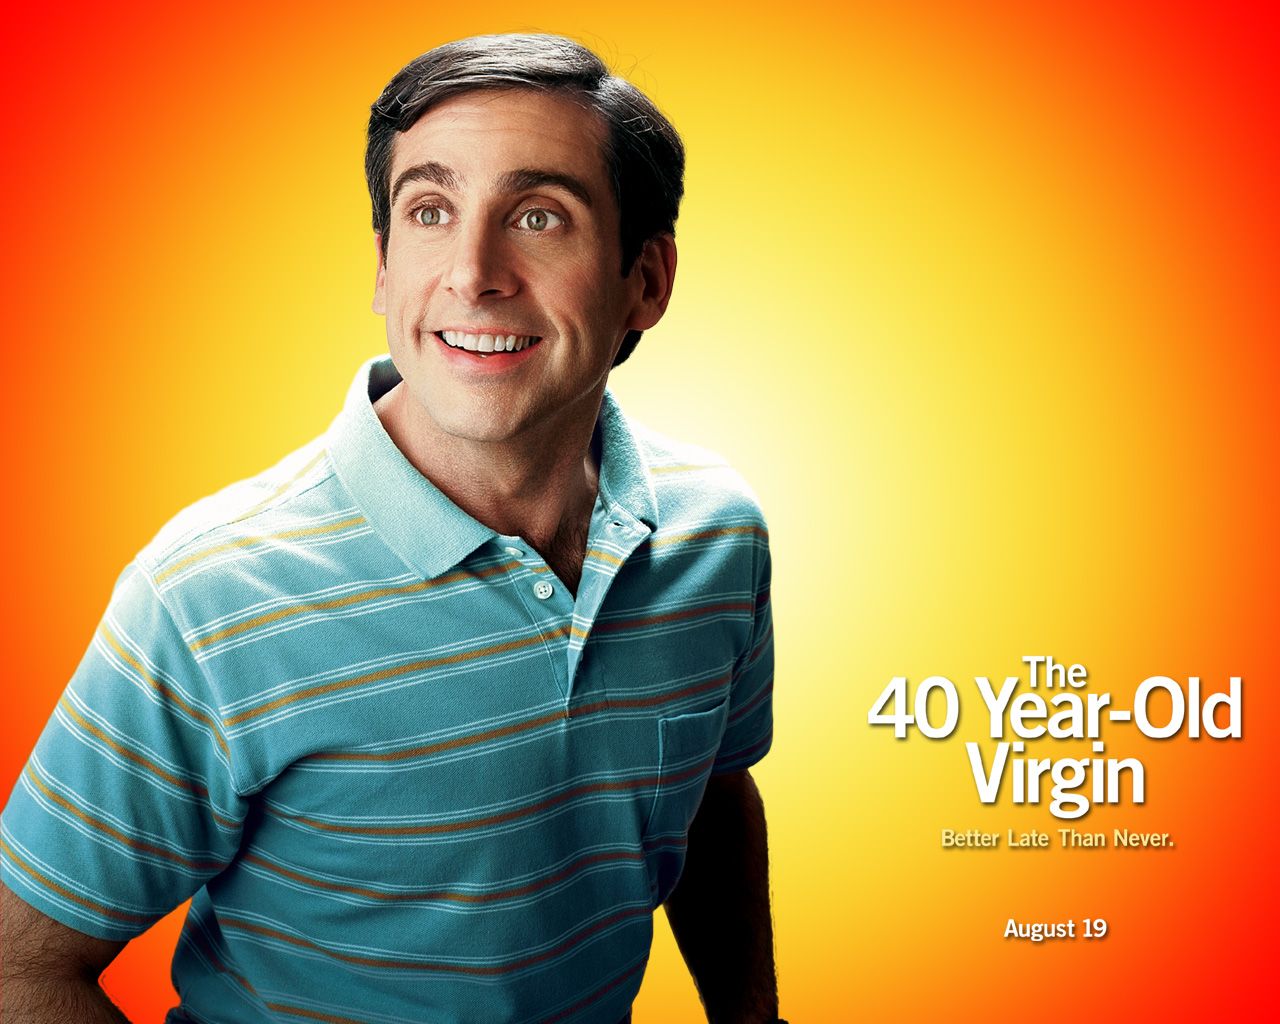 questions kids asked teachers - 40 year old virgin - The 40 YearOld Virgin Better Late Than Never. August 19